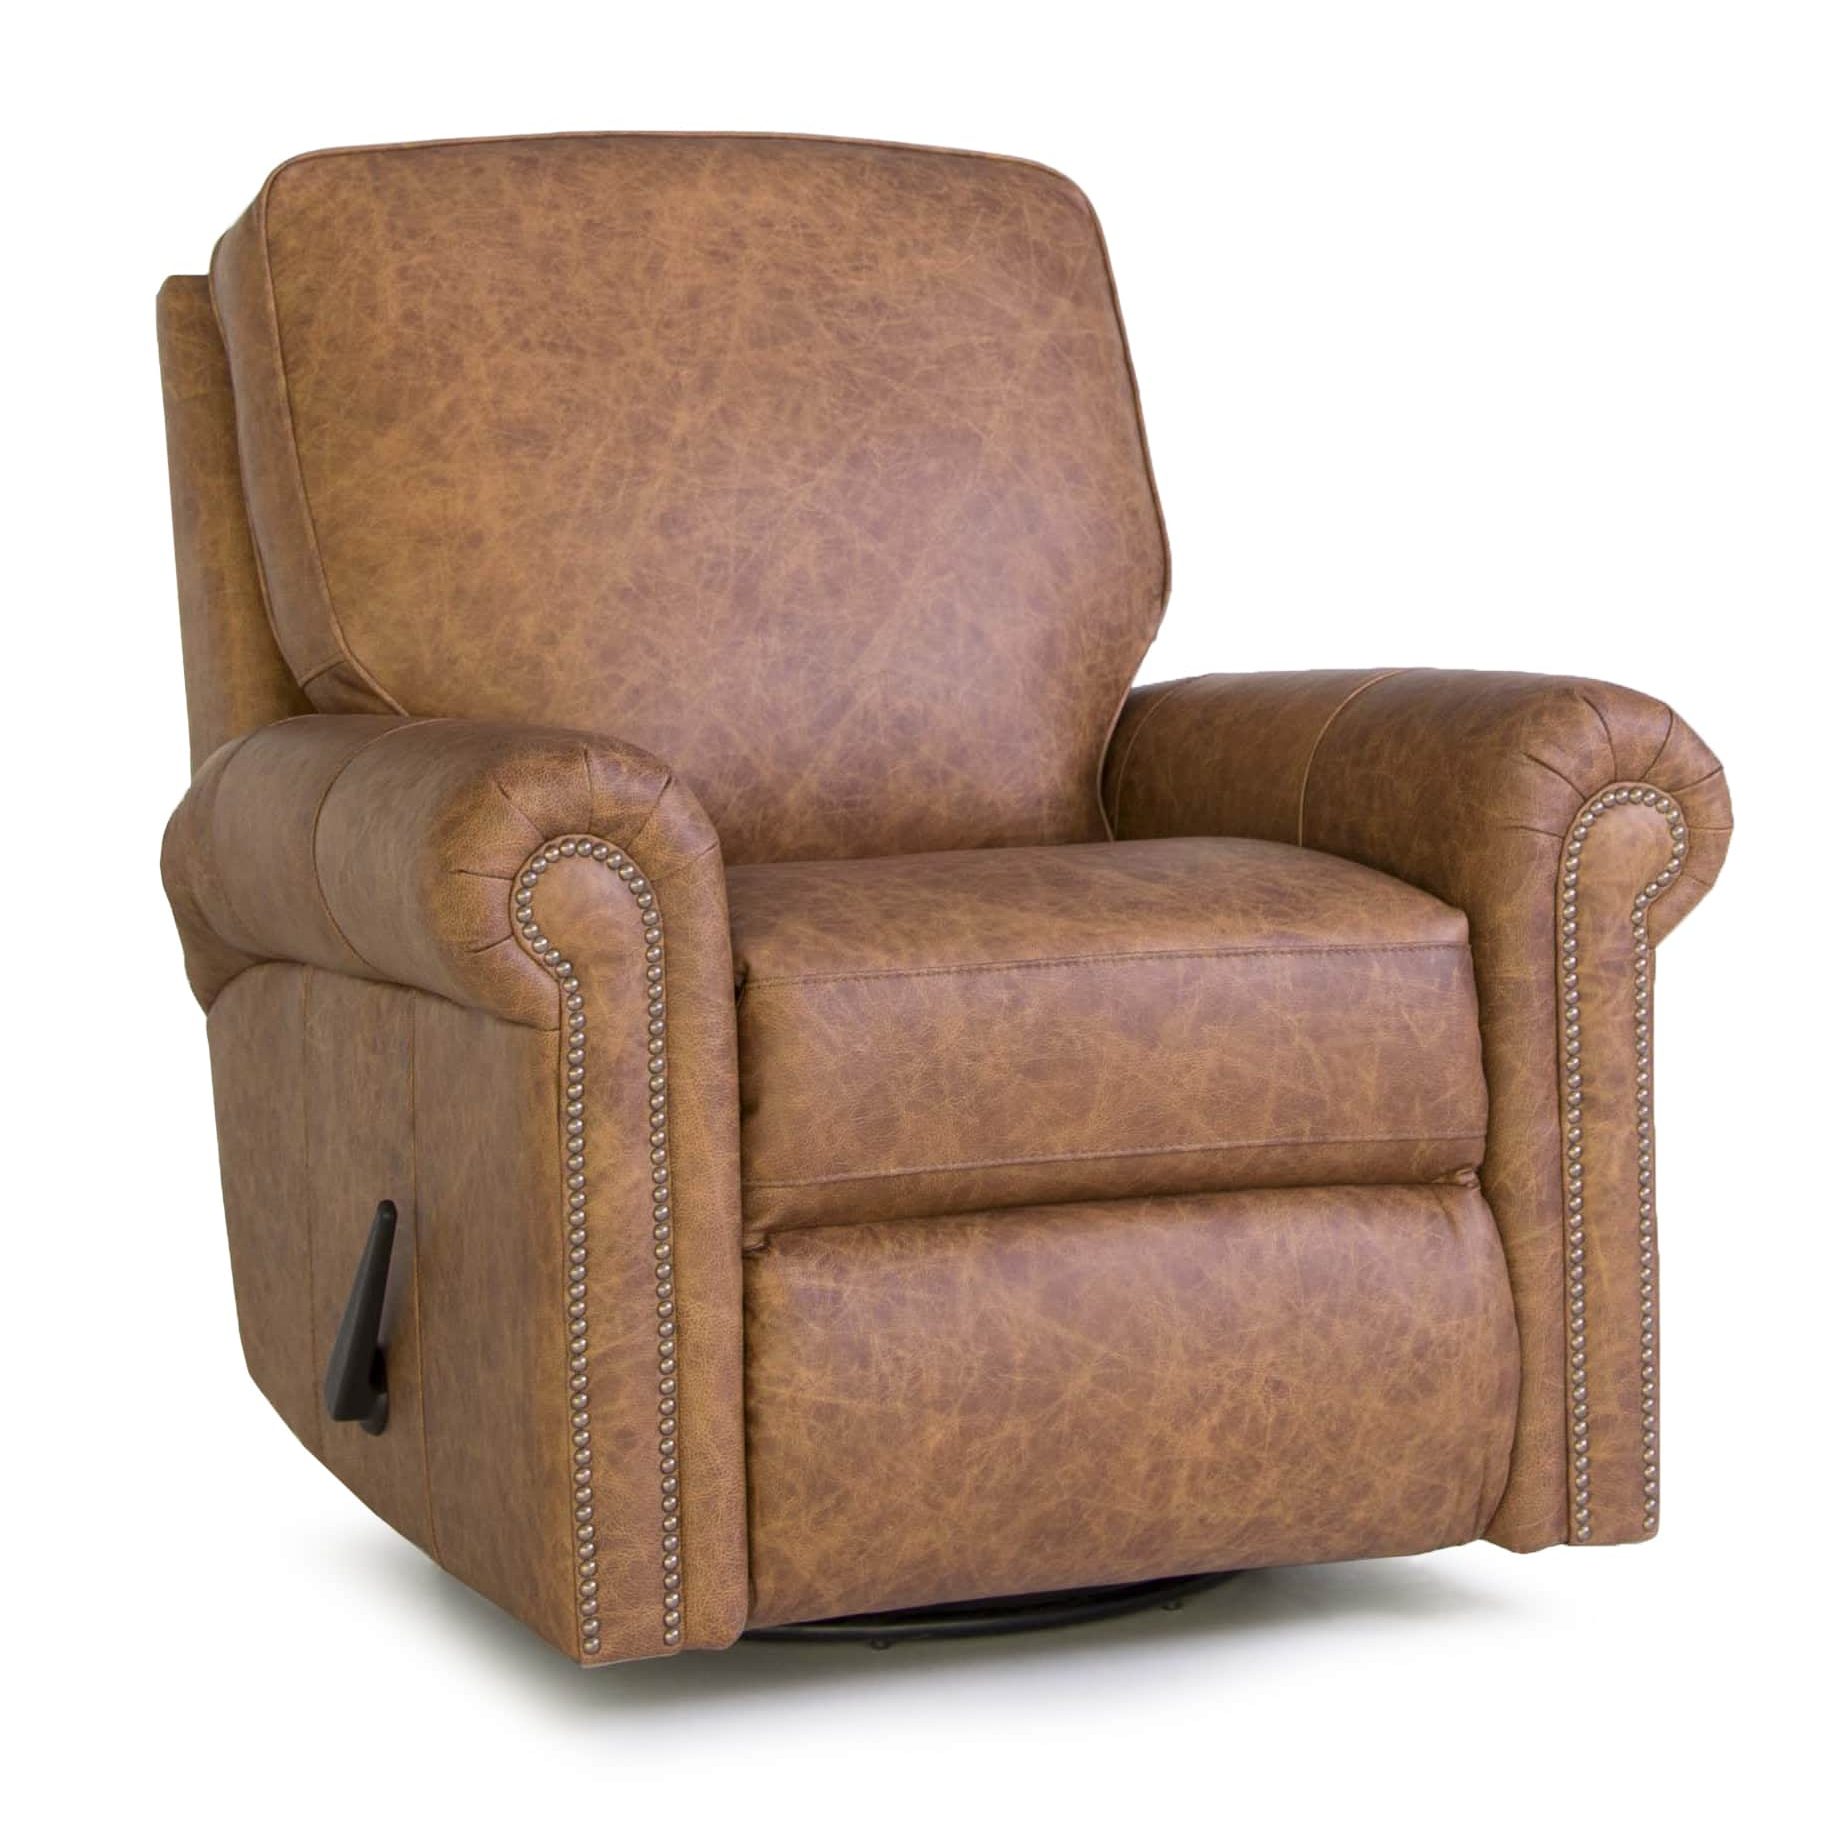 416-D-leather-recliner